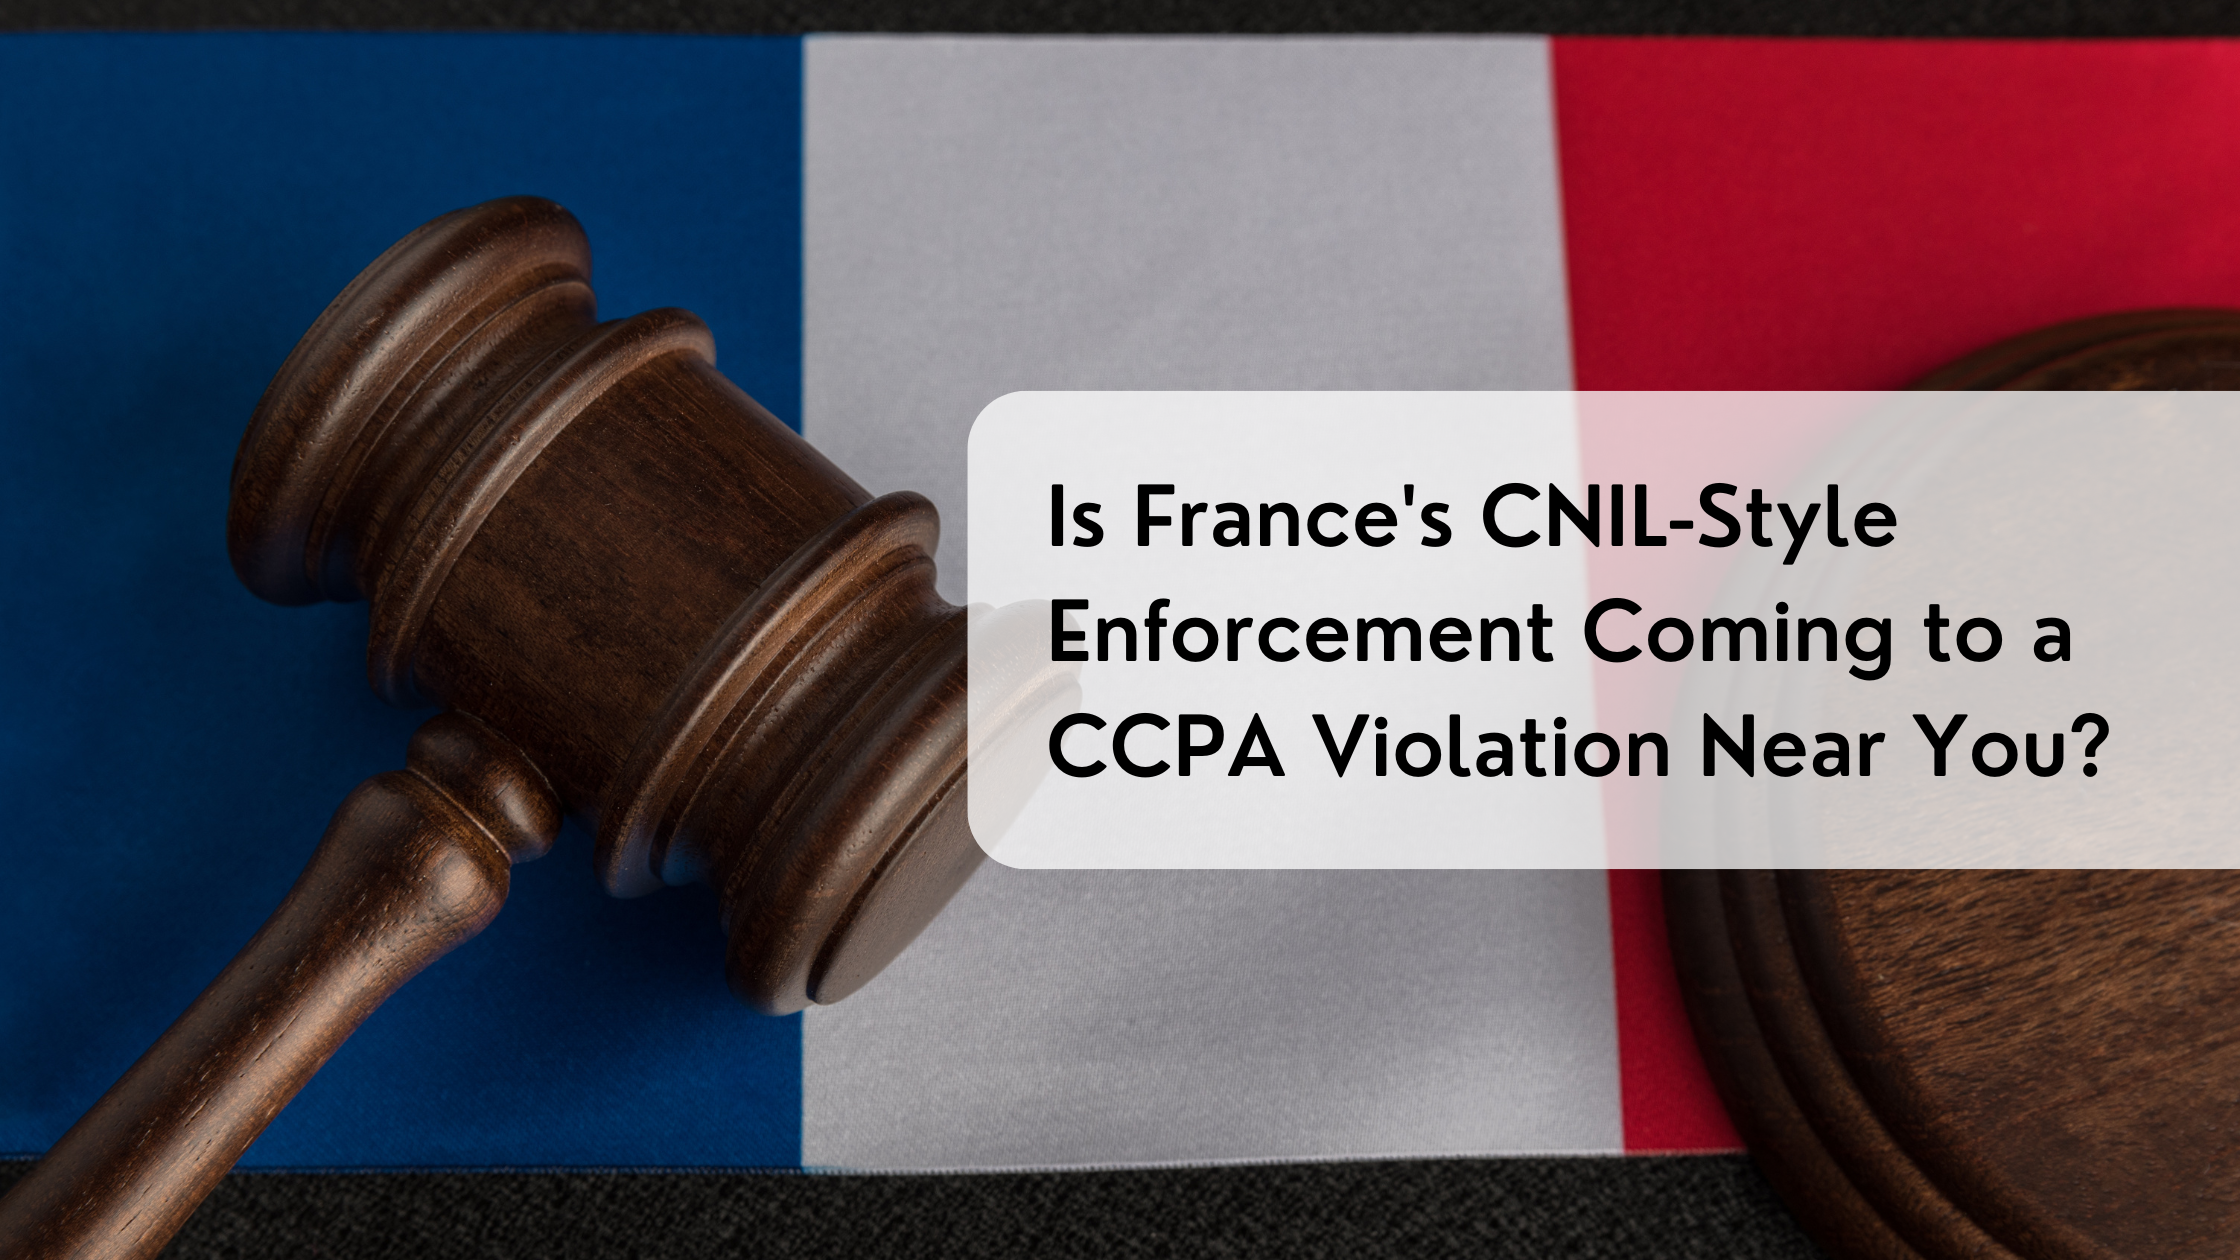 Is France's CNIL-Style Enforcement Coming to a CCPA Violation Near You?